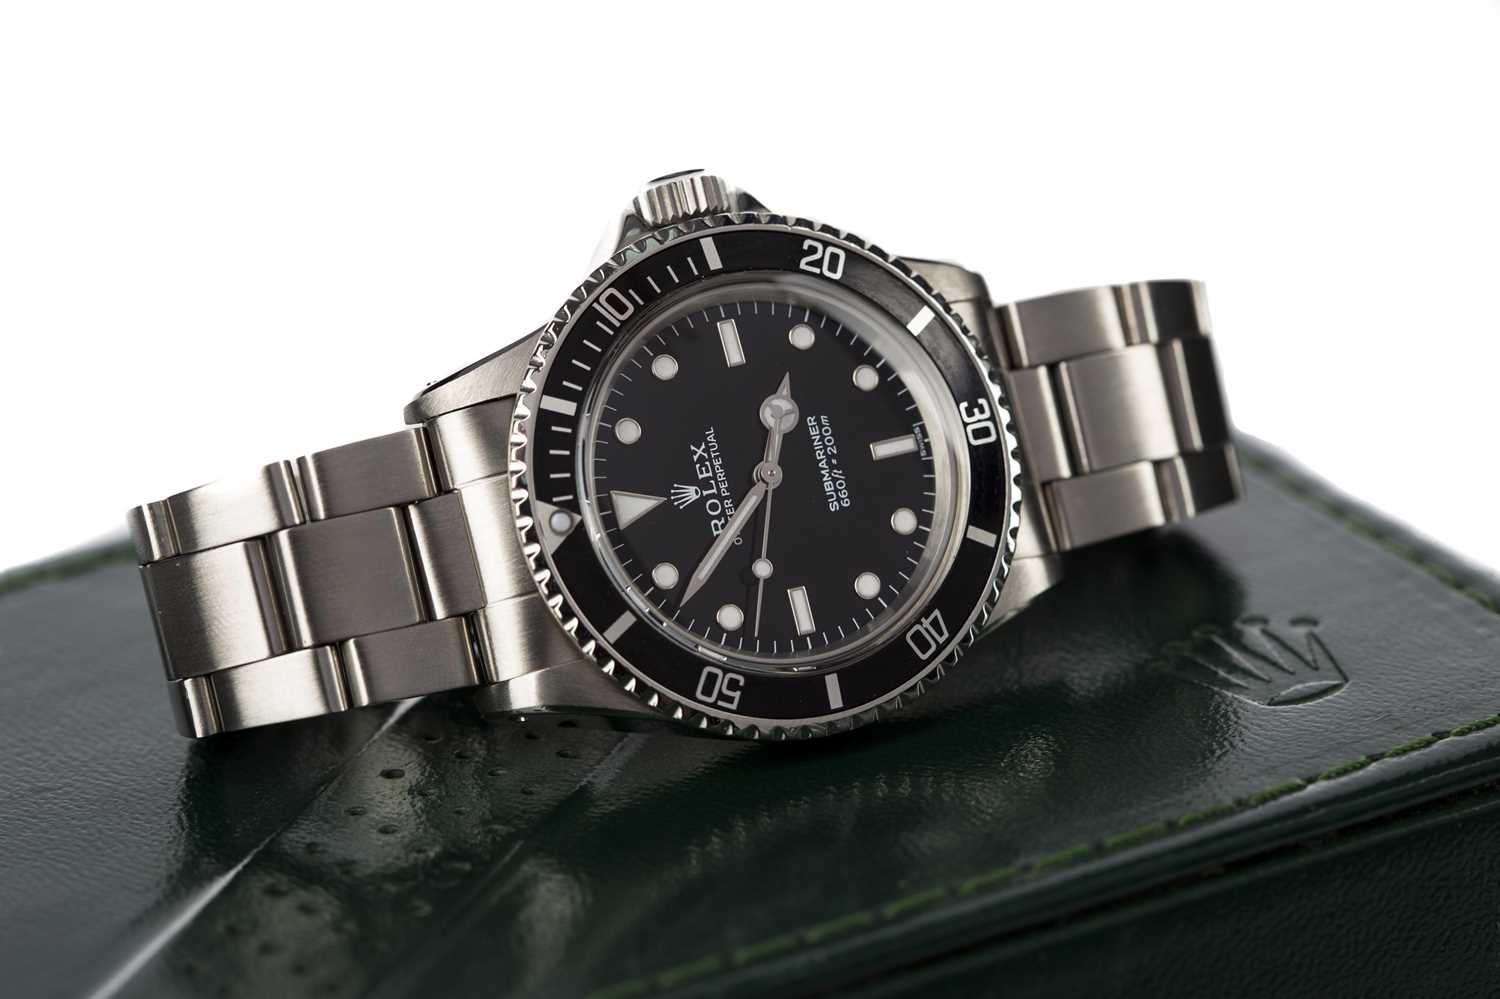 Lot 740 - A ROLEX 'COMEX' SUBMARINER STAINLESS STEEL AUTOMATIC WRIST WATCH